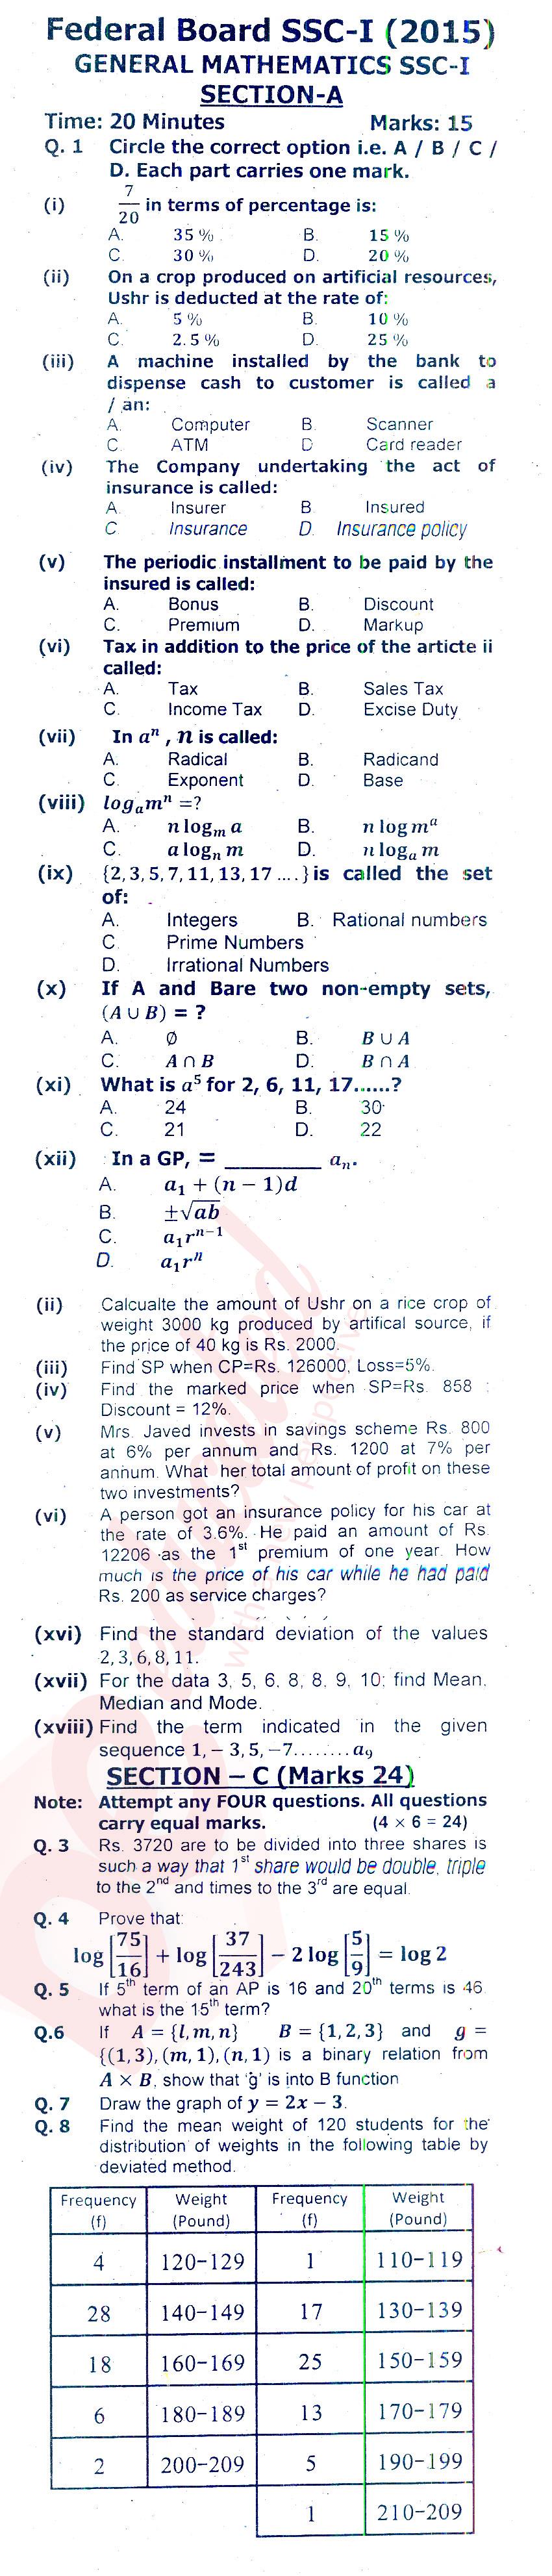 General Math 9th class Past Paper Group 1 Federal BISE  2015